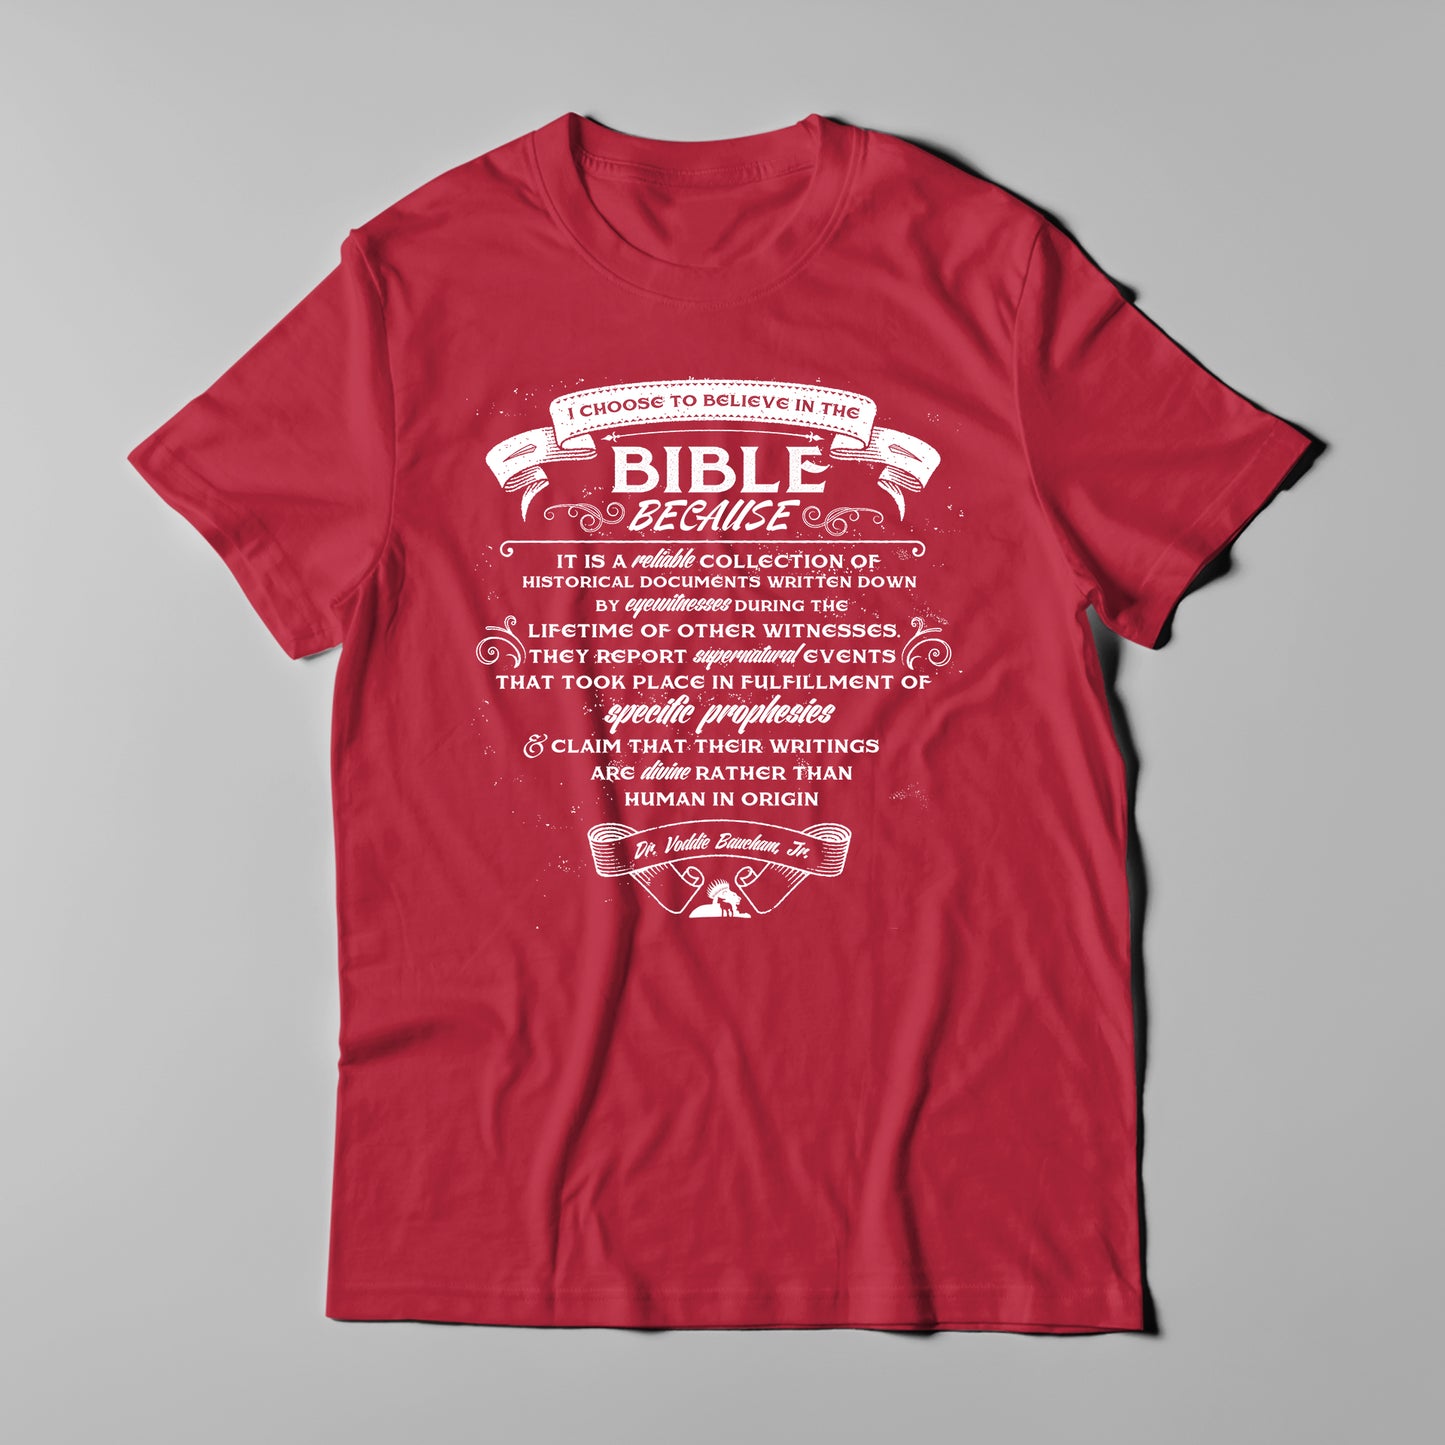 Why I Believe The Bible | T-Shirt (VBM)